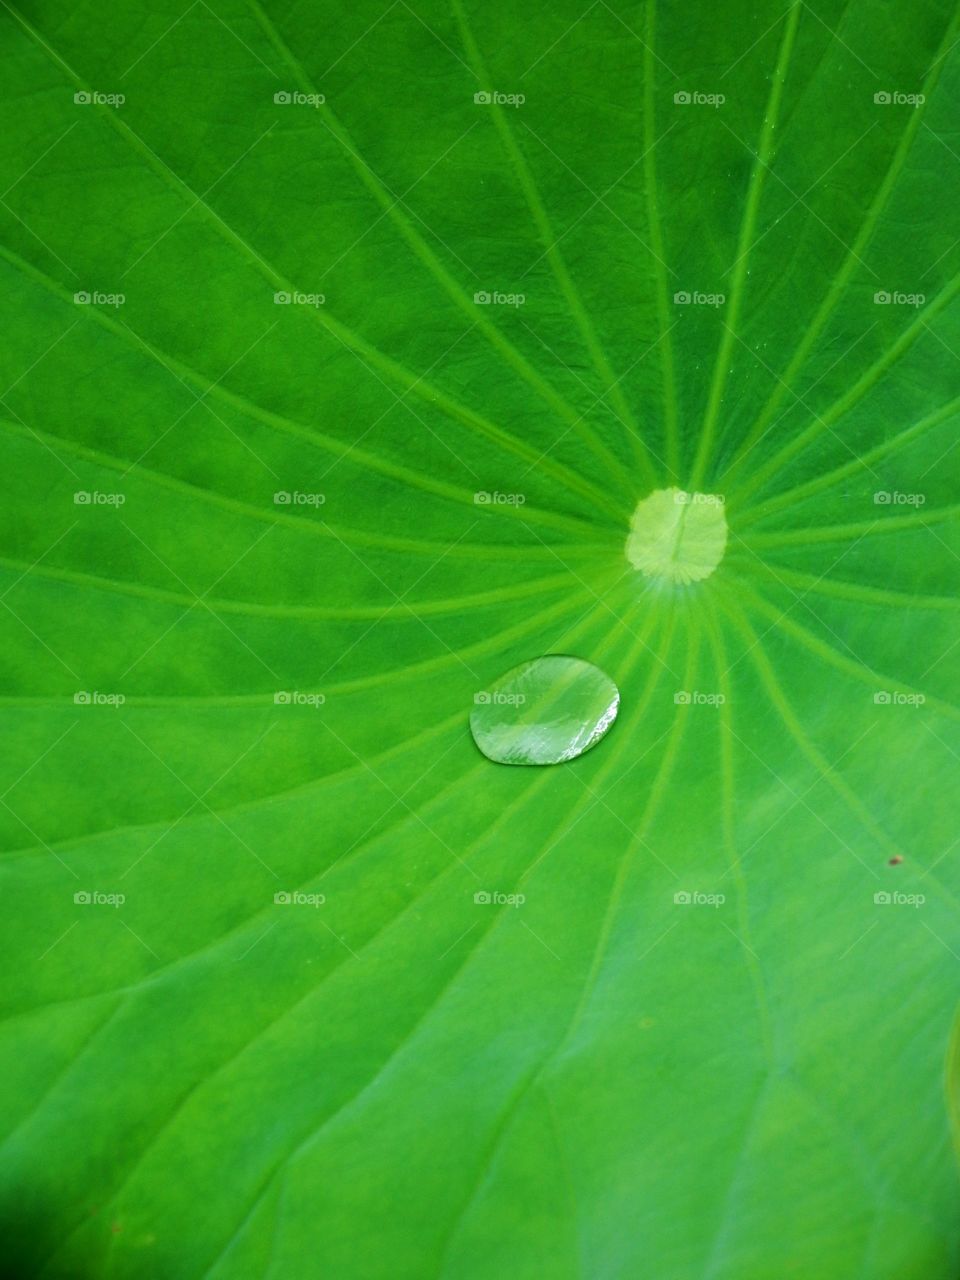 A lone water drop on a  bright green leaf.